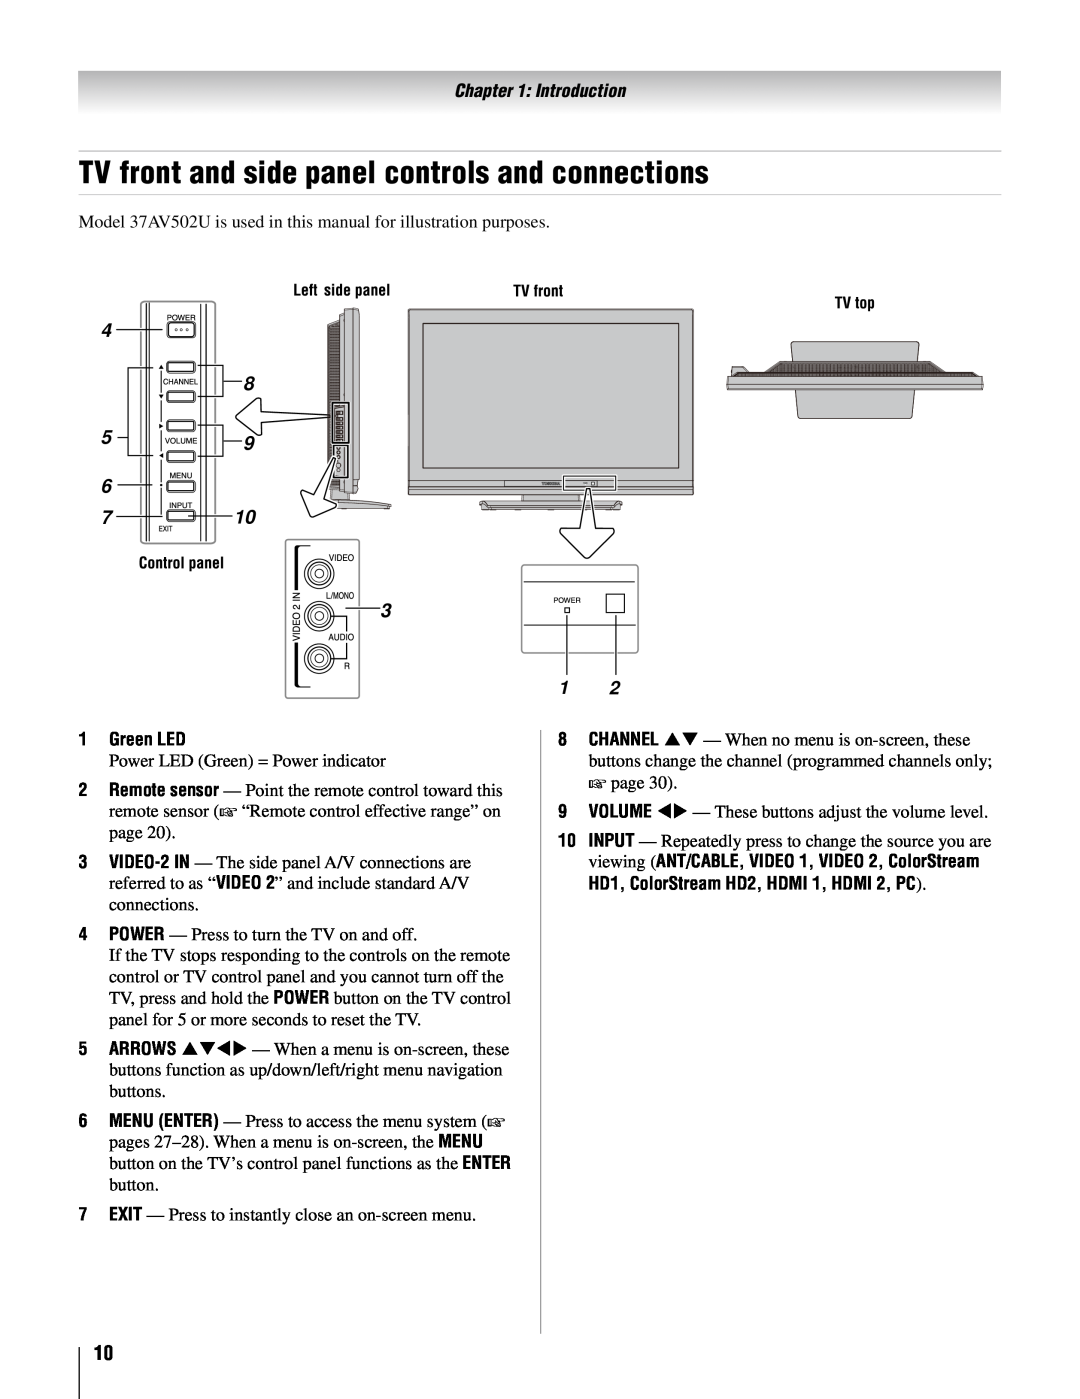 Toshiba 26AV52U, 32AV502U, 32AV50SU, 37AV52U TV front and side panel controls and connections, Introduction, Green LED 